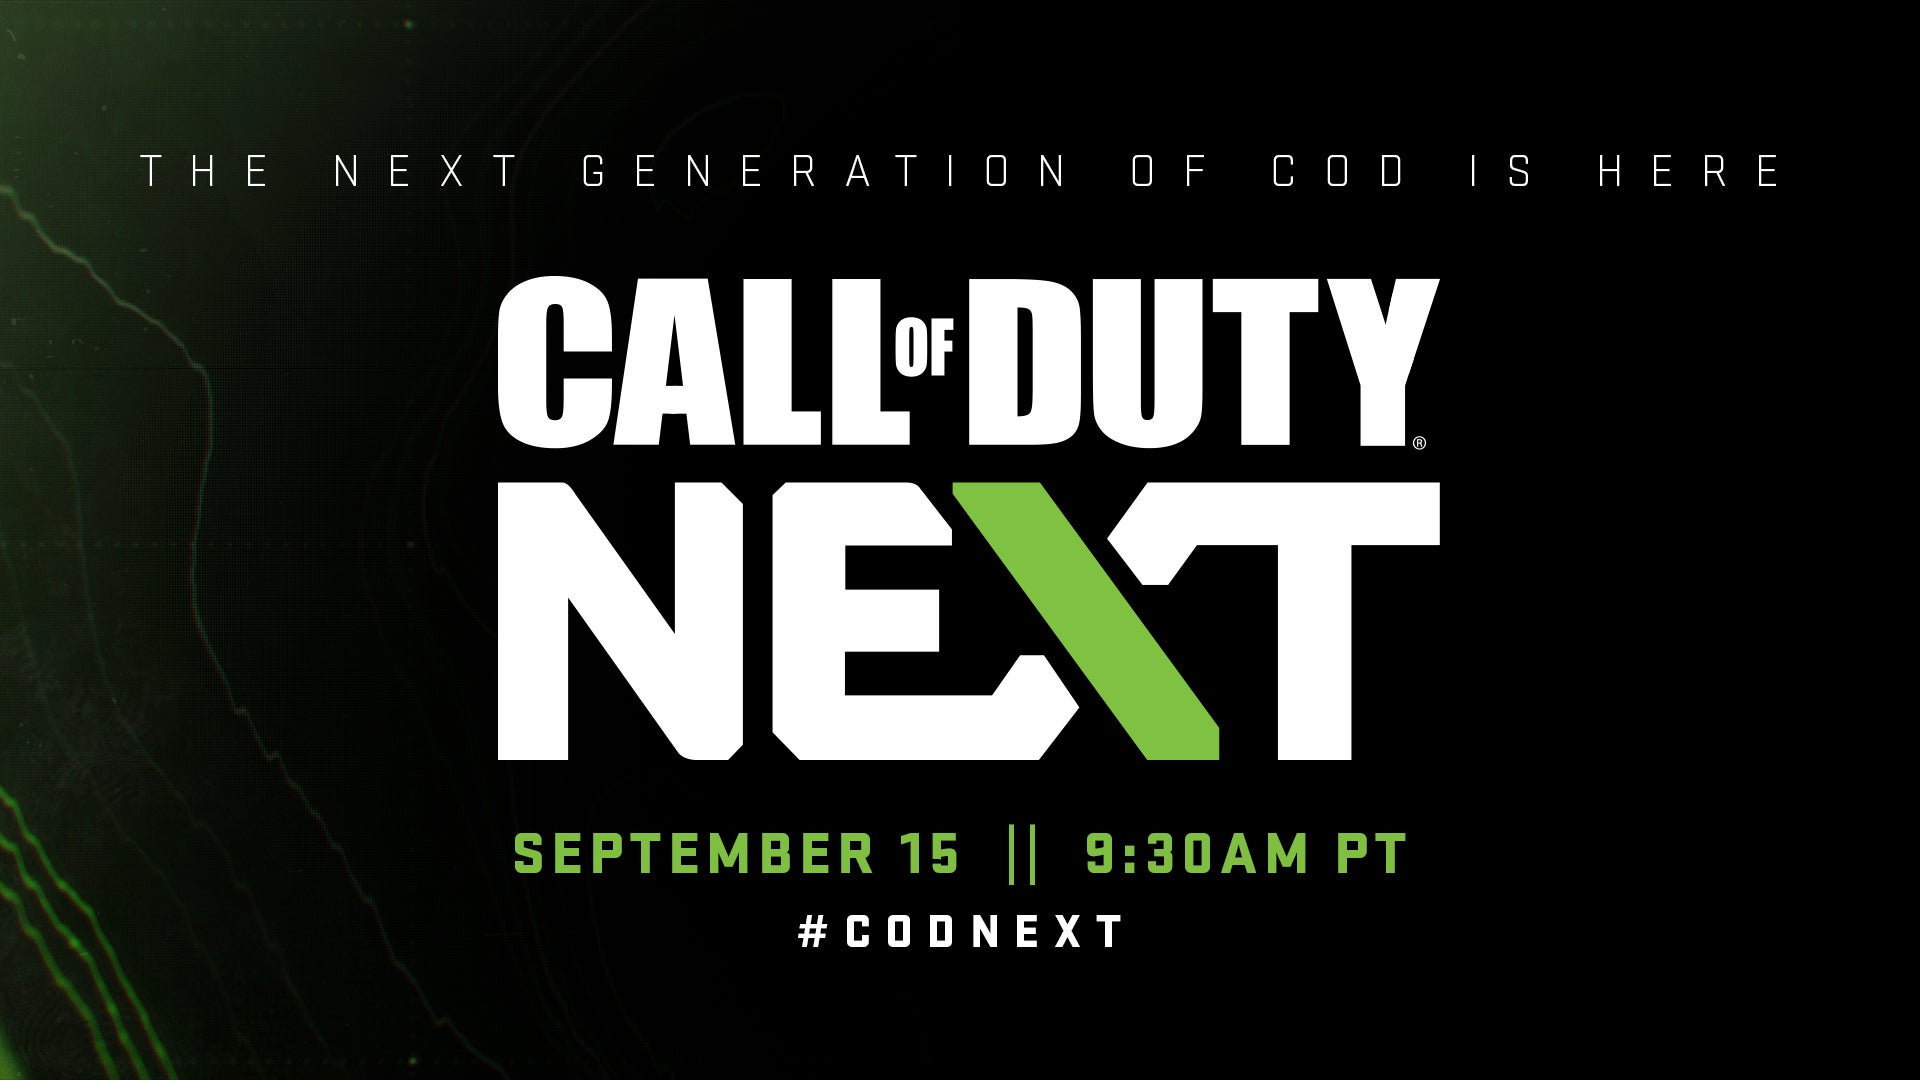 Image for Watch Call of Duty: Next here today for our first look at Modern Warfare 2 multiplayer